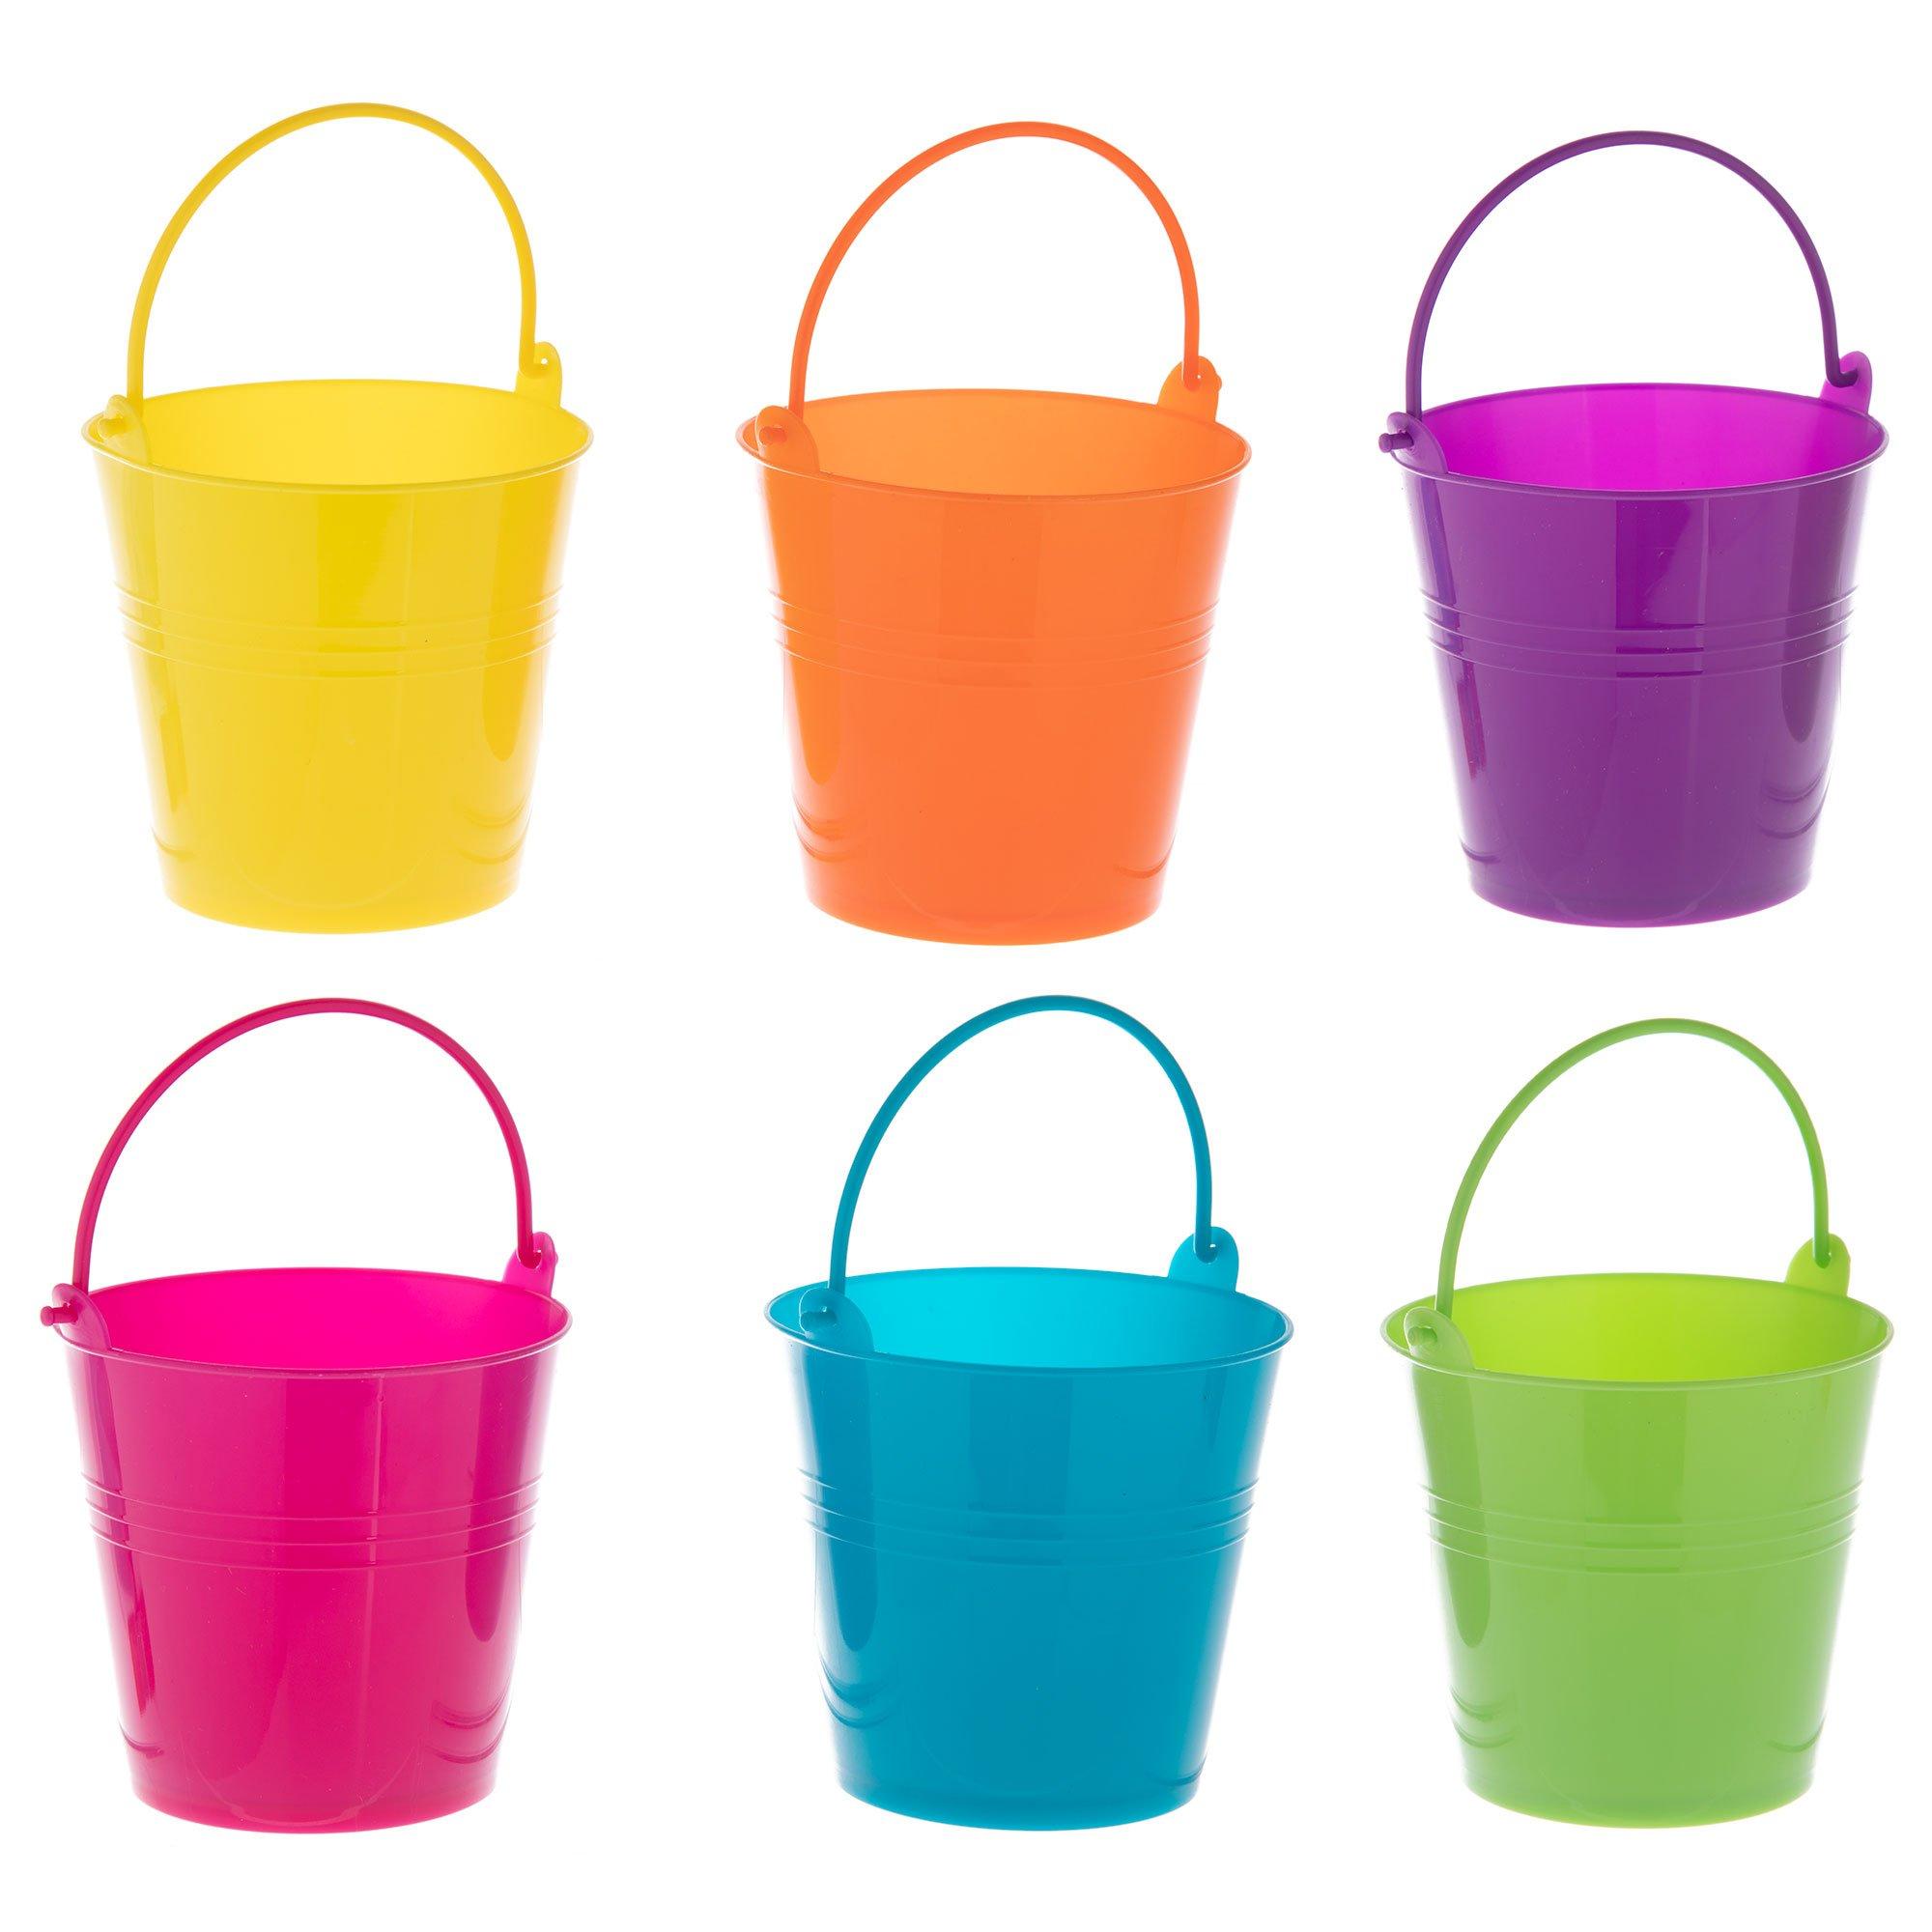 4Pcs 2x2 Small Metal Bucket Colorful Mini Buckets with Handles Assorted  Colors